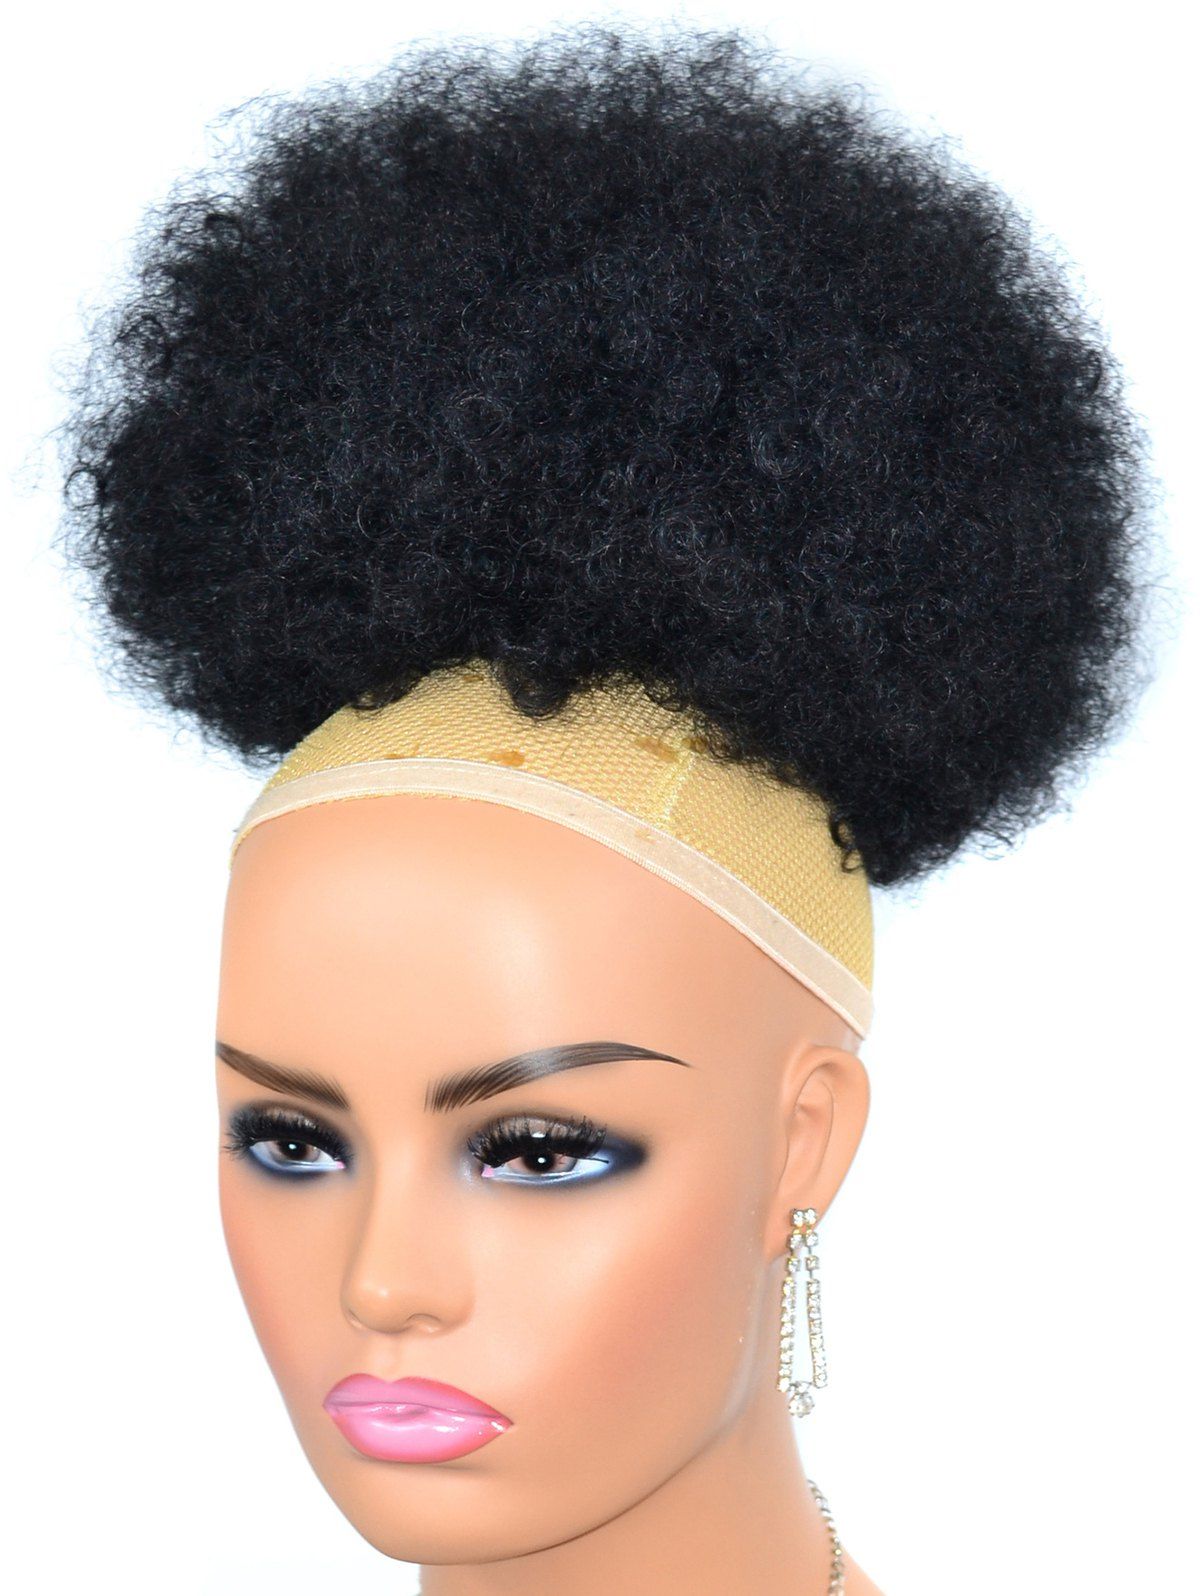 Black Afro Curly Messy Heat Resistant Hair Bun Synthetic Short Wig - BLACK 